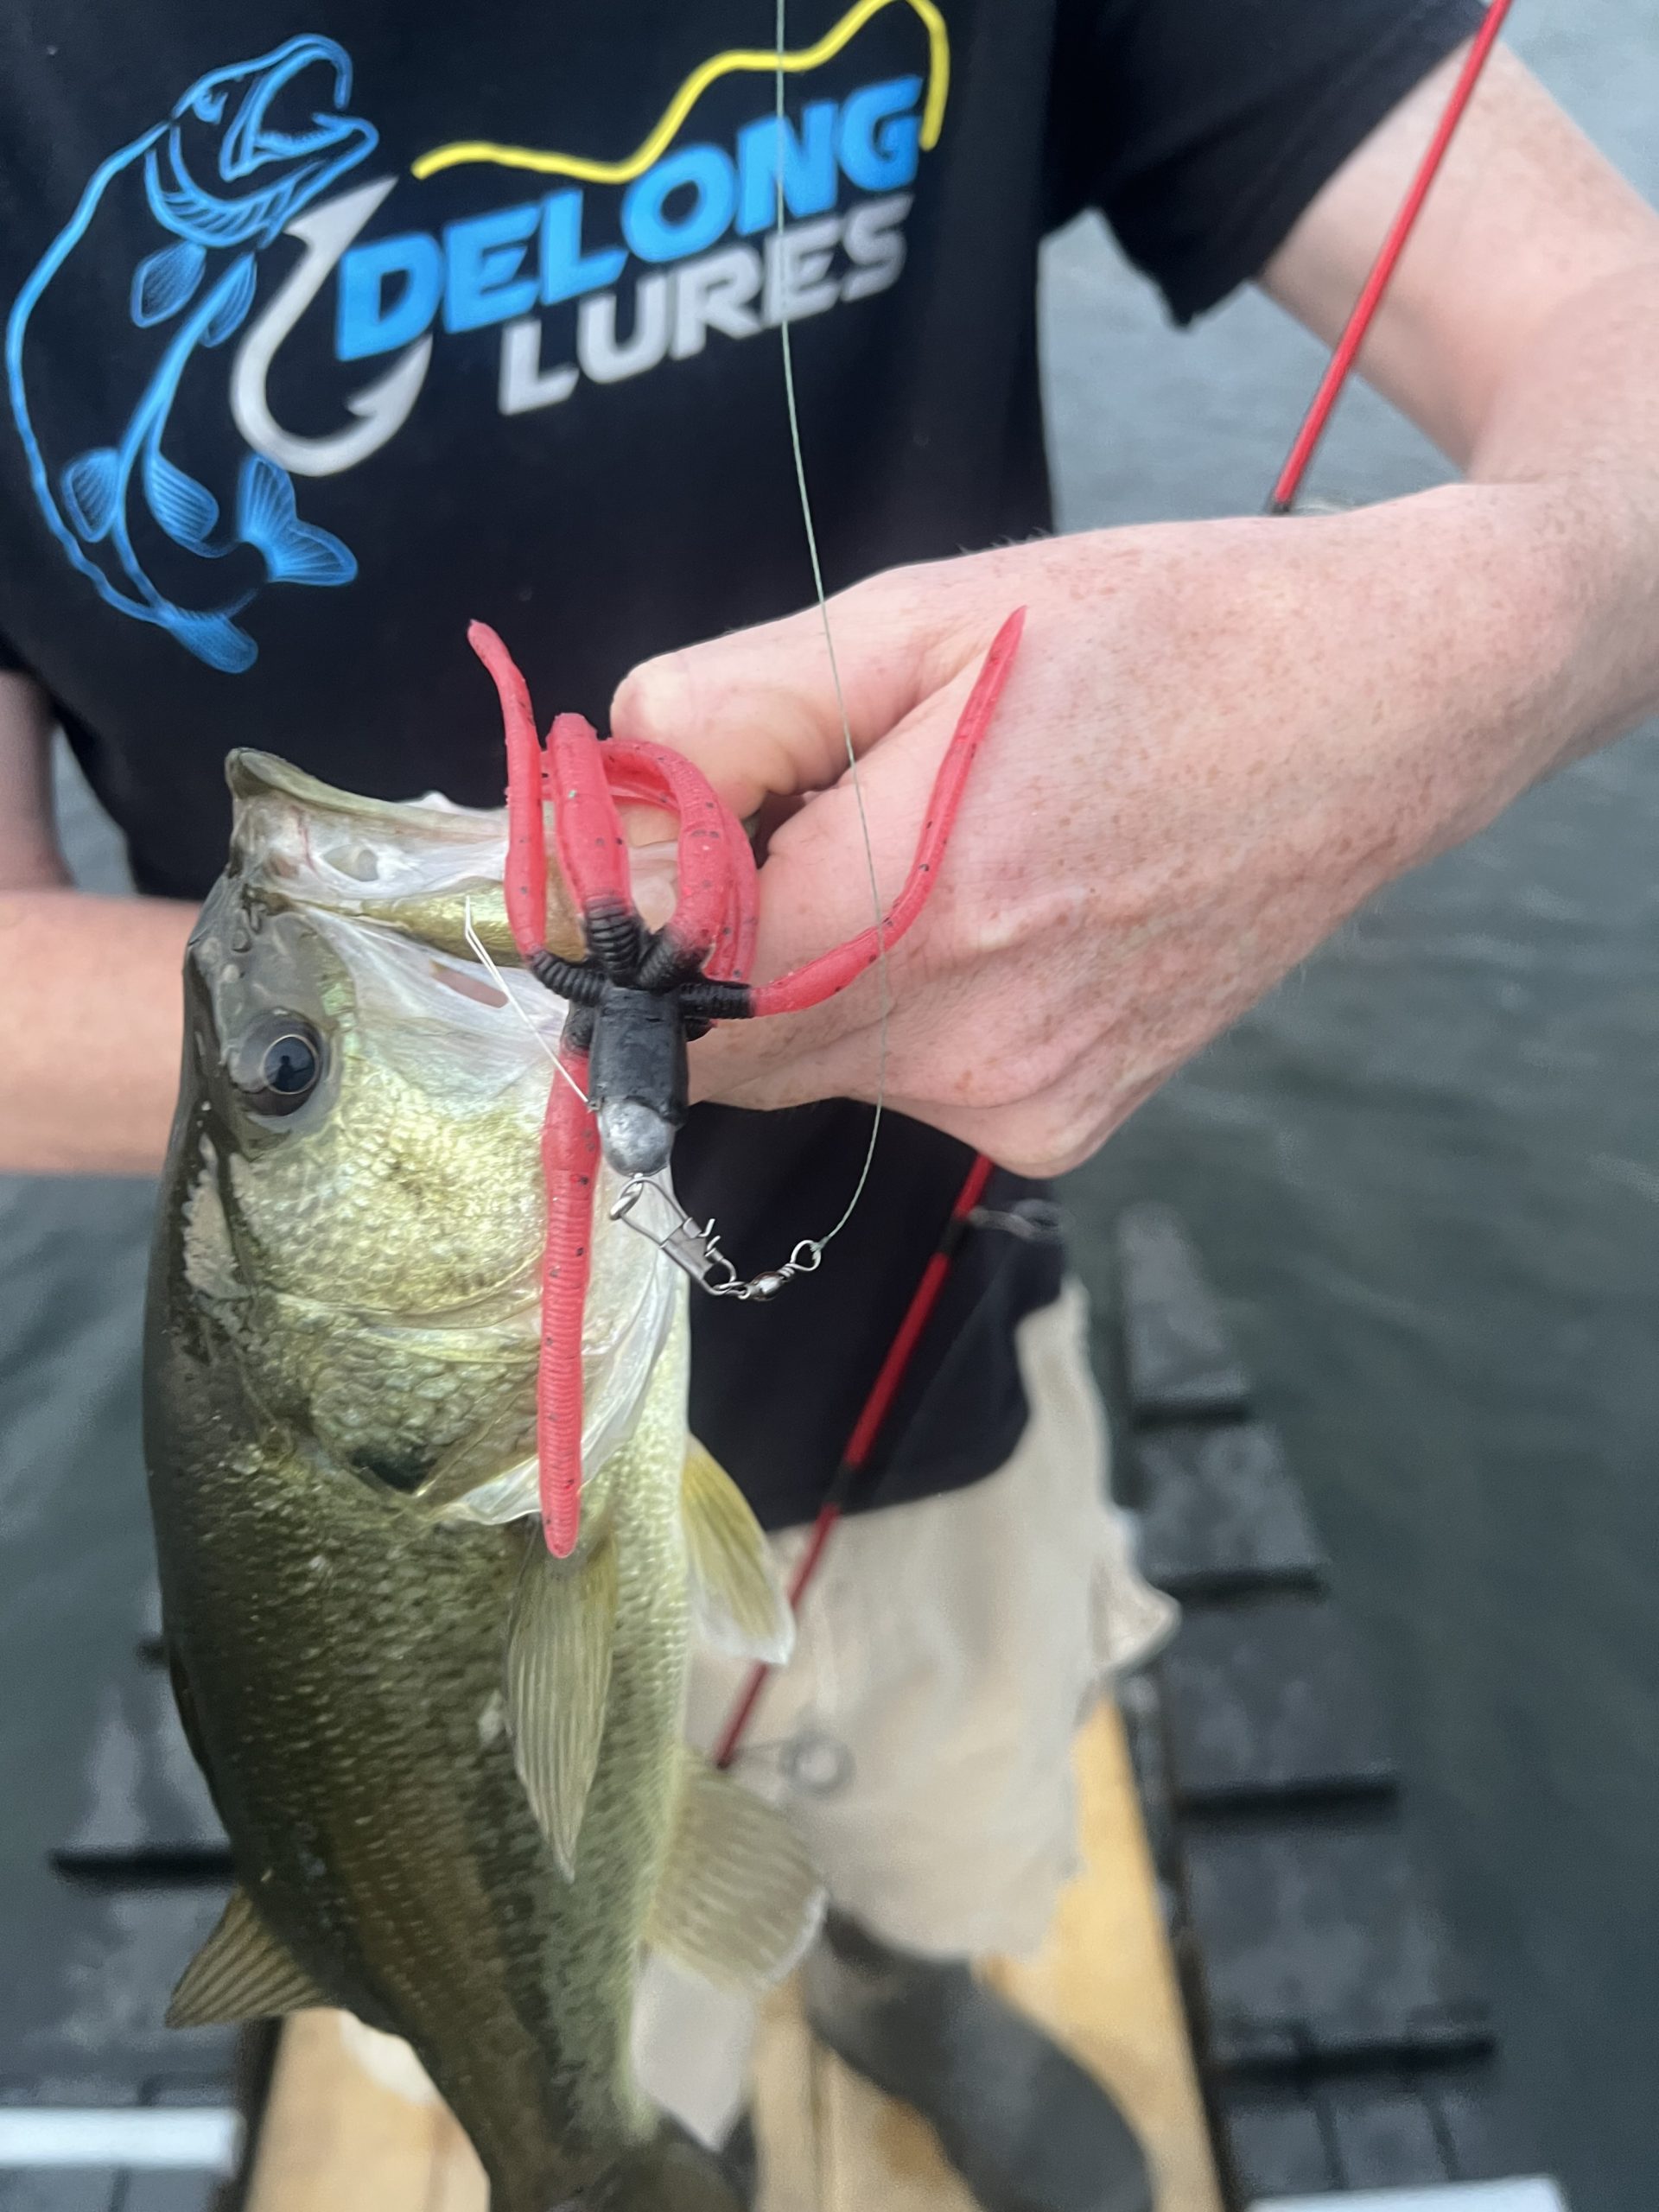  Delong Lures - 8 Bass Witch Pre Rigged Weedless Soft